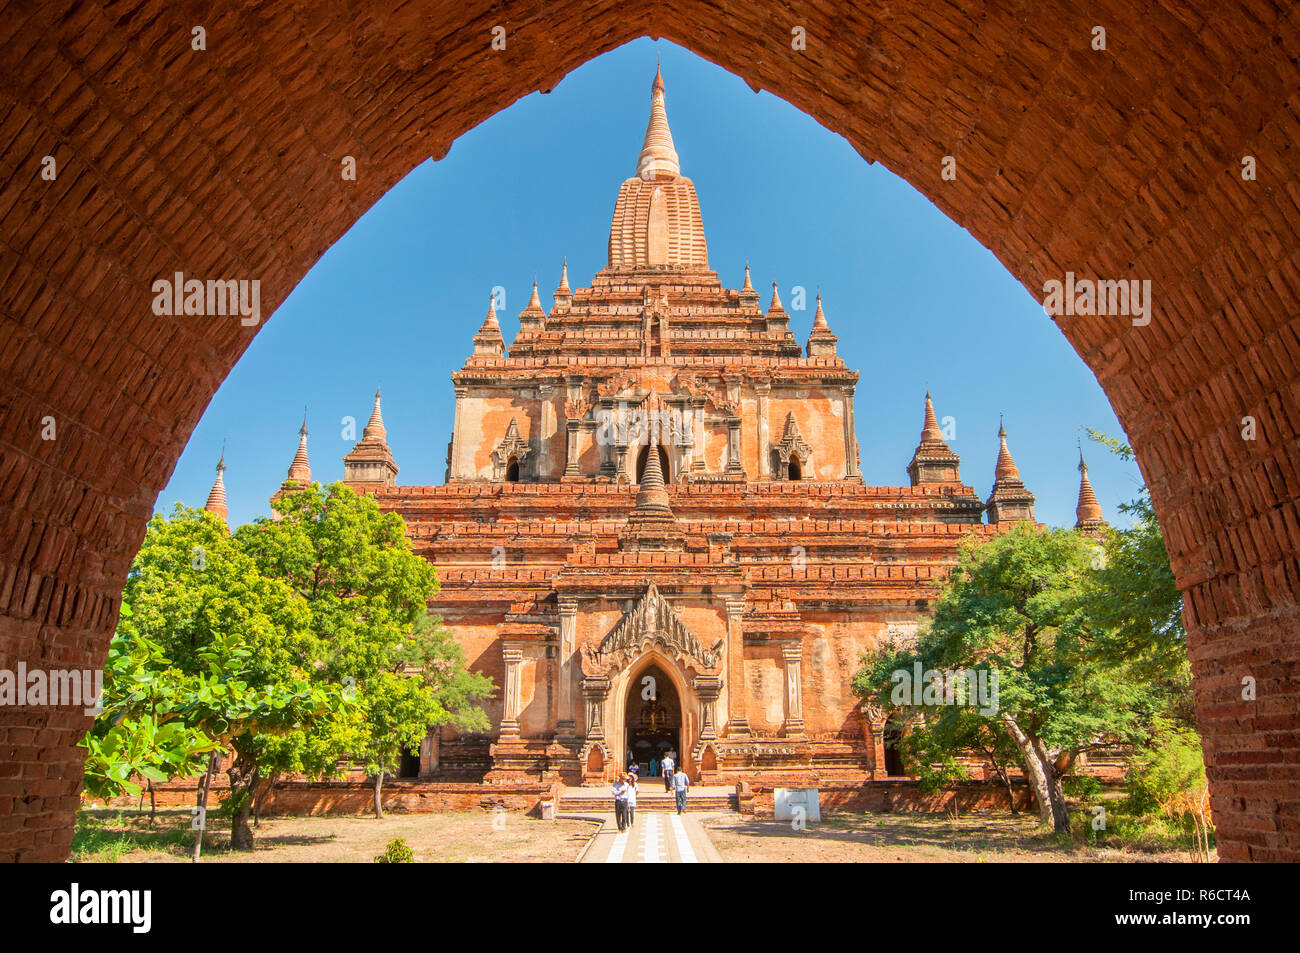 The Sulamani Temple Is A Buddhist Temple Located In The Village Of Minnanthu (Southwest Of Bagan) In Burma The Temple Is One Of The Most-Frequently Vi Stock Photo